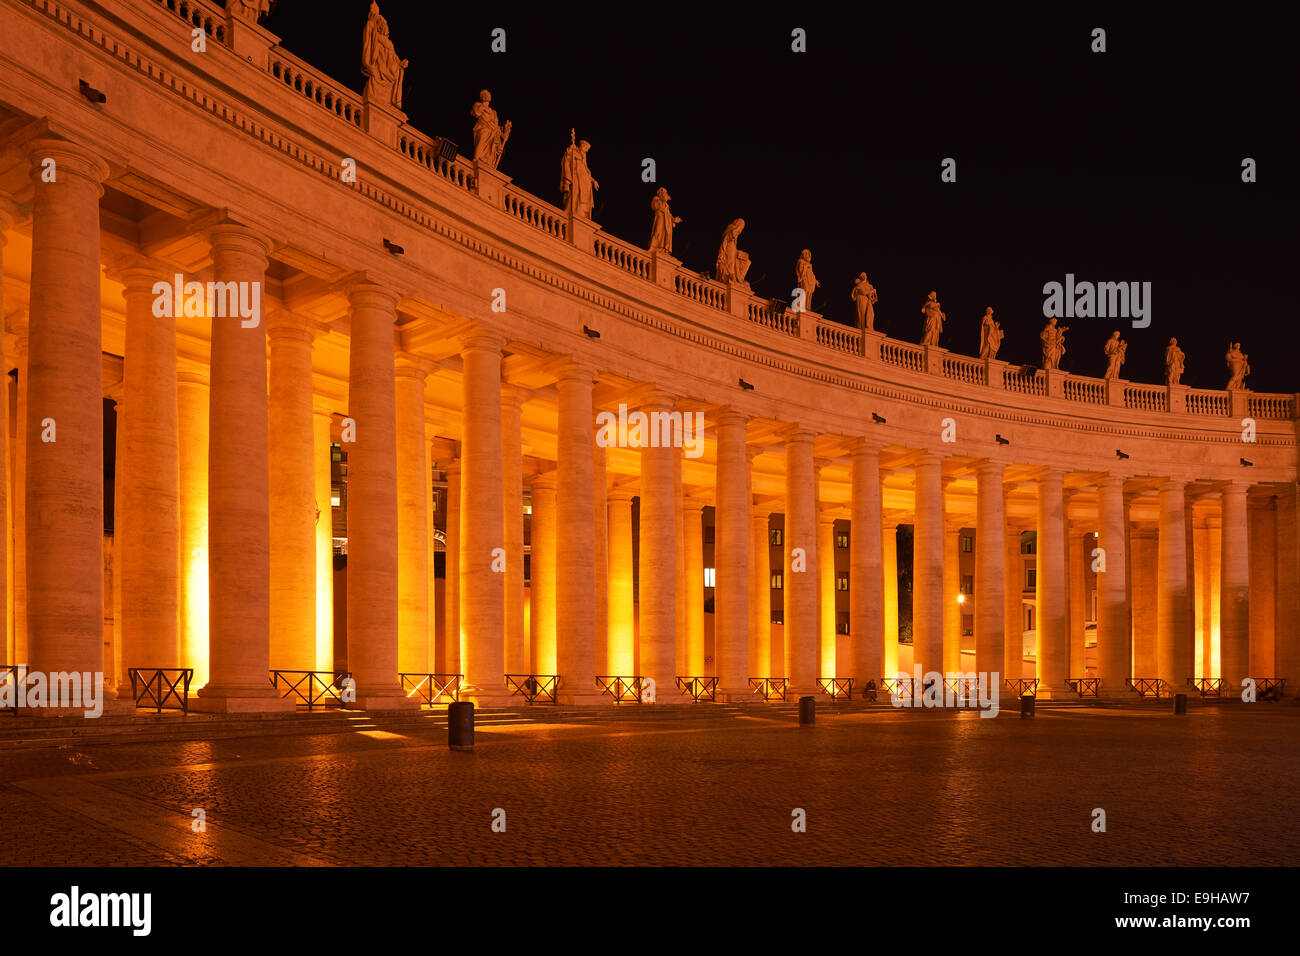 Colonnade at St. Peter's Square, Vatican City, Vatican, Rome, Italy Stock Photo